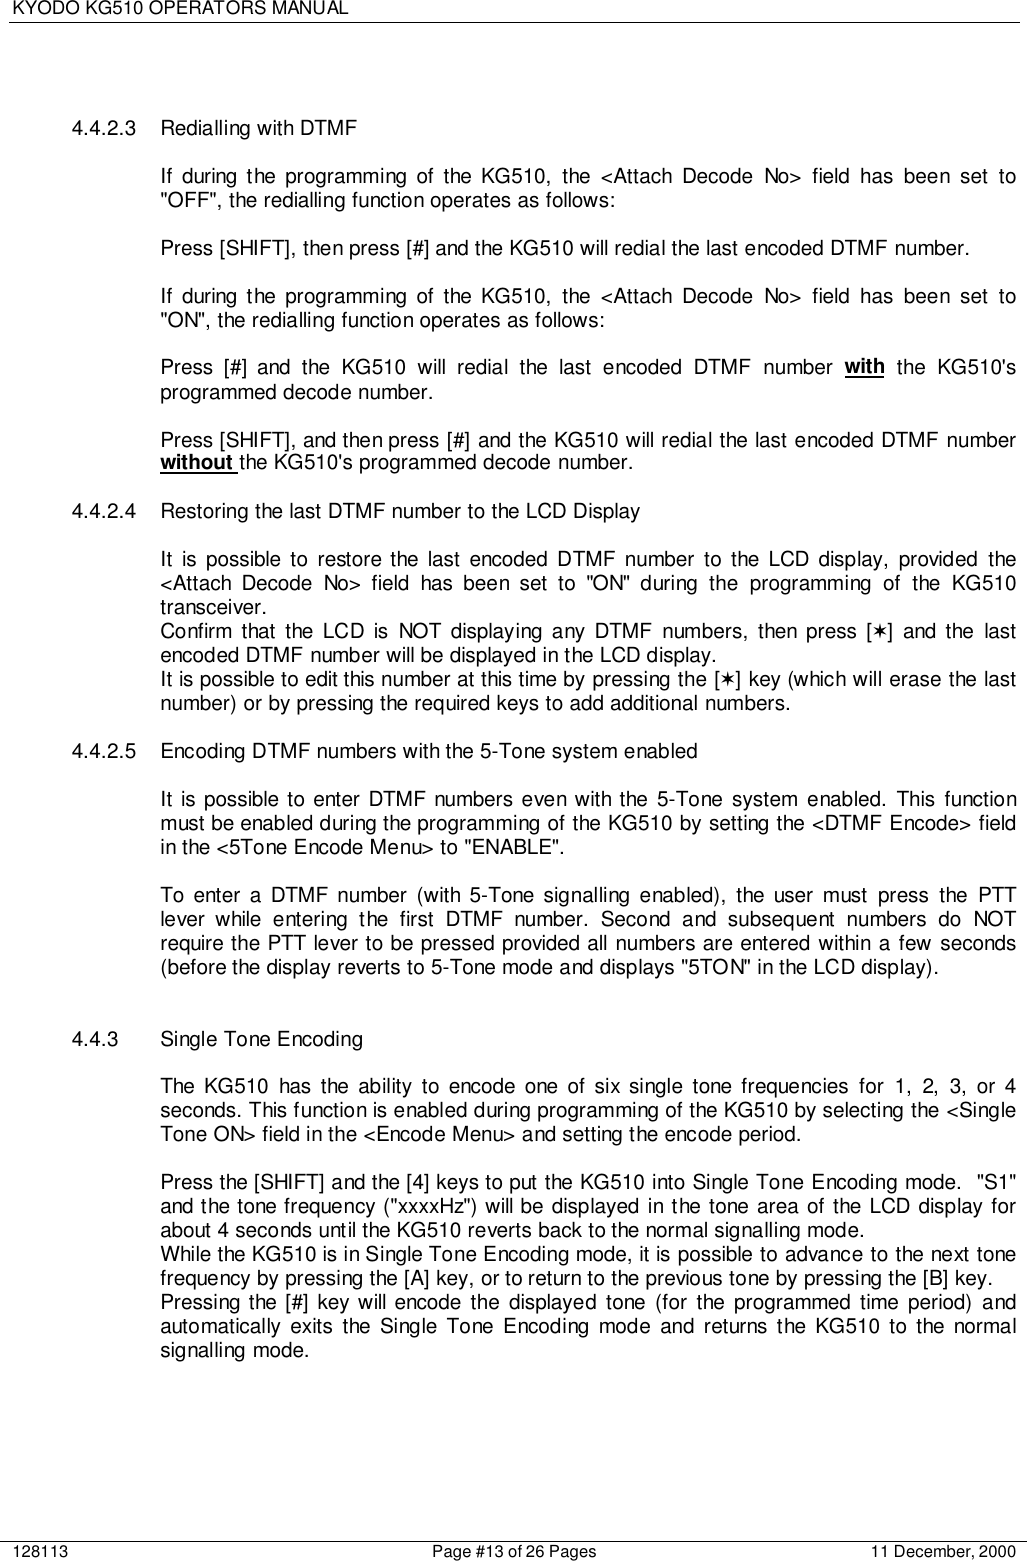 KYODO KG510 OPERATORS MANUAL128113 Page #13 of 26 Pages 11 December, 20004.4.2.3  Redialling with DTMFIf during the programming of the KG510, the &lt;Attach Decode No&gt; field has been set to&quot;OFF&quot;, the redialling function operates as follows:Press [SHIFT], then press [#] and the KG510 will redial the last encoded DTMF number.If during the programming of the KG510, the &lt;Attach Decode No&gt; field has been set to&quot;ON&quot;, the redialling function operates as follows:Press [#] and the KG510 will redial the last encoded DTMF number with the KG510&apos;sprogrammed decode number.Press [SHIFT], and then press [#] and the KG510 will redial the last encoded DTMF numberwithout the KG510&apos;s programmed decode number.4.4.2.4  Restoring the last DTMF number to the LCD DisplayIt is possible to restore the last encoded DTMF number to the LCD display, provided the&lt;Attach Decode No&gt; field has been set to &quot;ON&quot; during the programming of the KG510transceiver.Confirm that the LCD is NOT displaying any DTMF numbers, then press [✶] and the lastencoded DTMF number will be displayed in the LCD display.It is possible to edit this number at this time by pressing the [✶] key (which will erase the lastnumber) or by pressing the required keys to add additional numbers.4.4.2.5 Encoding DTMF numbers with the 5-Tone system enabledIt is possible to enter DTMF numbers even with the 5-Tone system enabled. This functionmust be enabled during the programming of the KG510 by setting the &lt;DTMF Encode&gt; fieldin the &lt;5Tone Encode Menu&gt; to &quot;ENABLE&quot;.To enter a DTMF number (with 5-Tone signalling enabled), the user must press the PTTlever while entering the first DTMF number. Second and subsequent numbers do NOTrequire the PTT lever to be pressed provided all numbers are entered within a few seconds(before the display reverts to 5-Tone mode and displays &quot;5TON&quot; in the LCD display).4.4.3 Single Tone EncodingThe KG510 has the ability to encode one of six single tone frequencies for 1, 2, 3, or 4seconds. This function is enabled during programming of the KG510 by selecting the &lt;SingleTone ON&gt; field in the &lt;Encode Menu&gt; and setting the encode period.Press the [SHIFT] and the [4] keys to put the KG510 into Single Tone Encoding mode.  &quot;S1&quot;and the tone frequency (&quot;xxxxHz&quot;) will be displayed in the tone area of the LCD display forabout 4 seconds until the KG510 reverts back to the normal signalling mode.While the KG510 is in Single Tone Encoding mode, it is possible to advance to the next tonefrequency by pressing the [A] key, or to return to the previous tone by pressing the [B] key.Pressing the [#] key will encode the displayed tone (for the programmed time period) andautomatically exits the Single Tone Encoding mode and returns the KG510 to the normalsignalling mode.